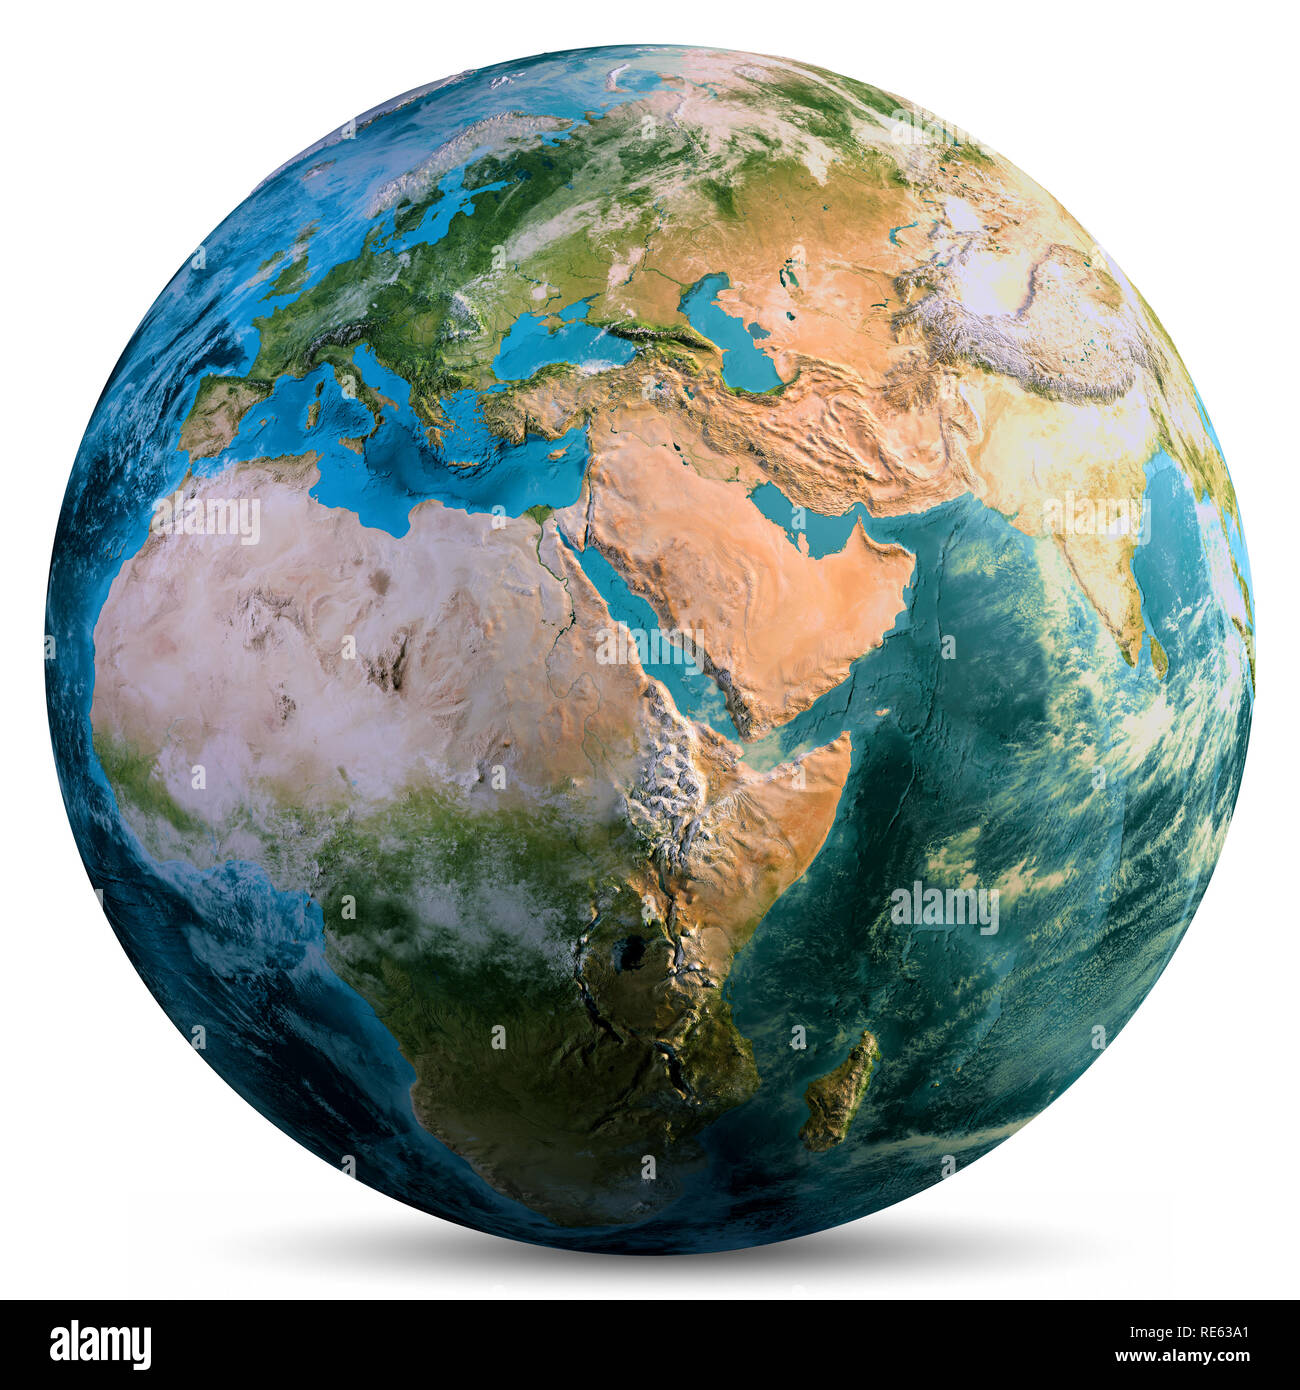 Planet Earth continents Stock Photo